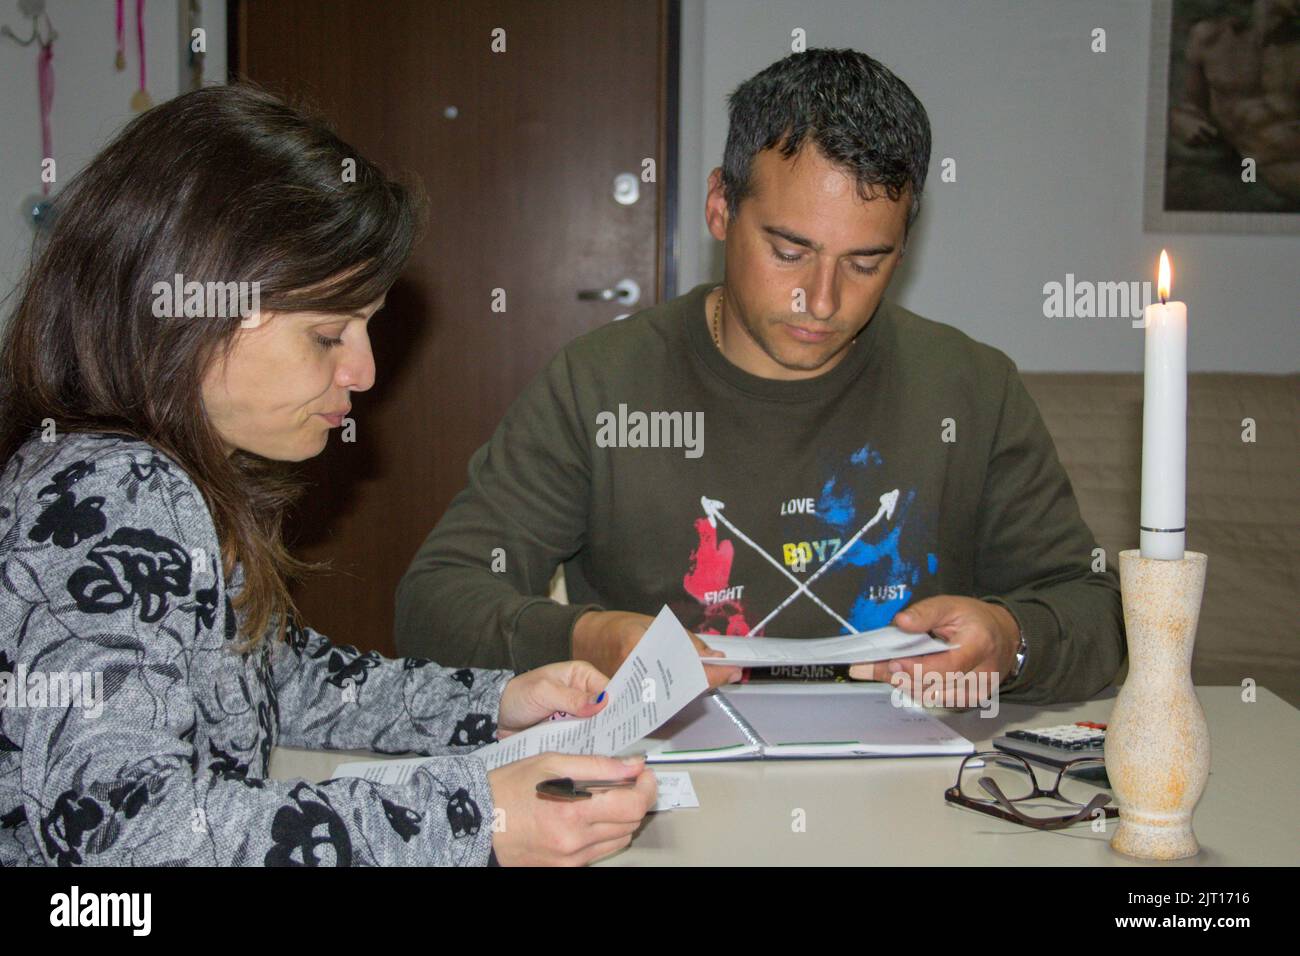 Image of a man and woman checking their electricity and gas bills. Economic problems due to the current global energy crisis Stock Photo